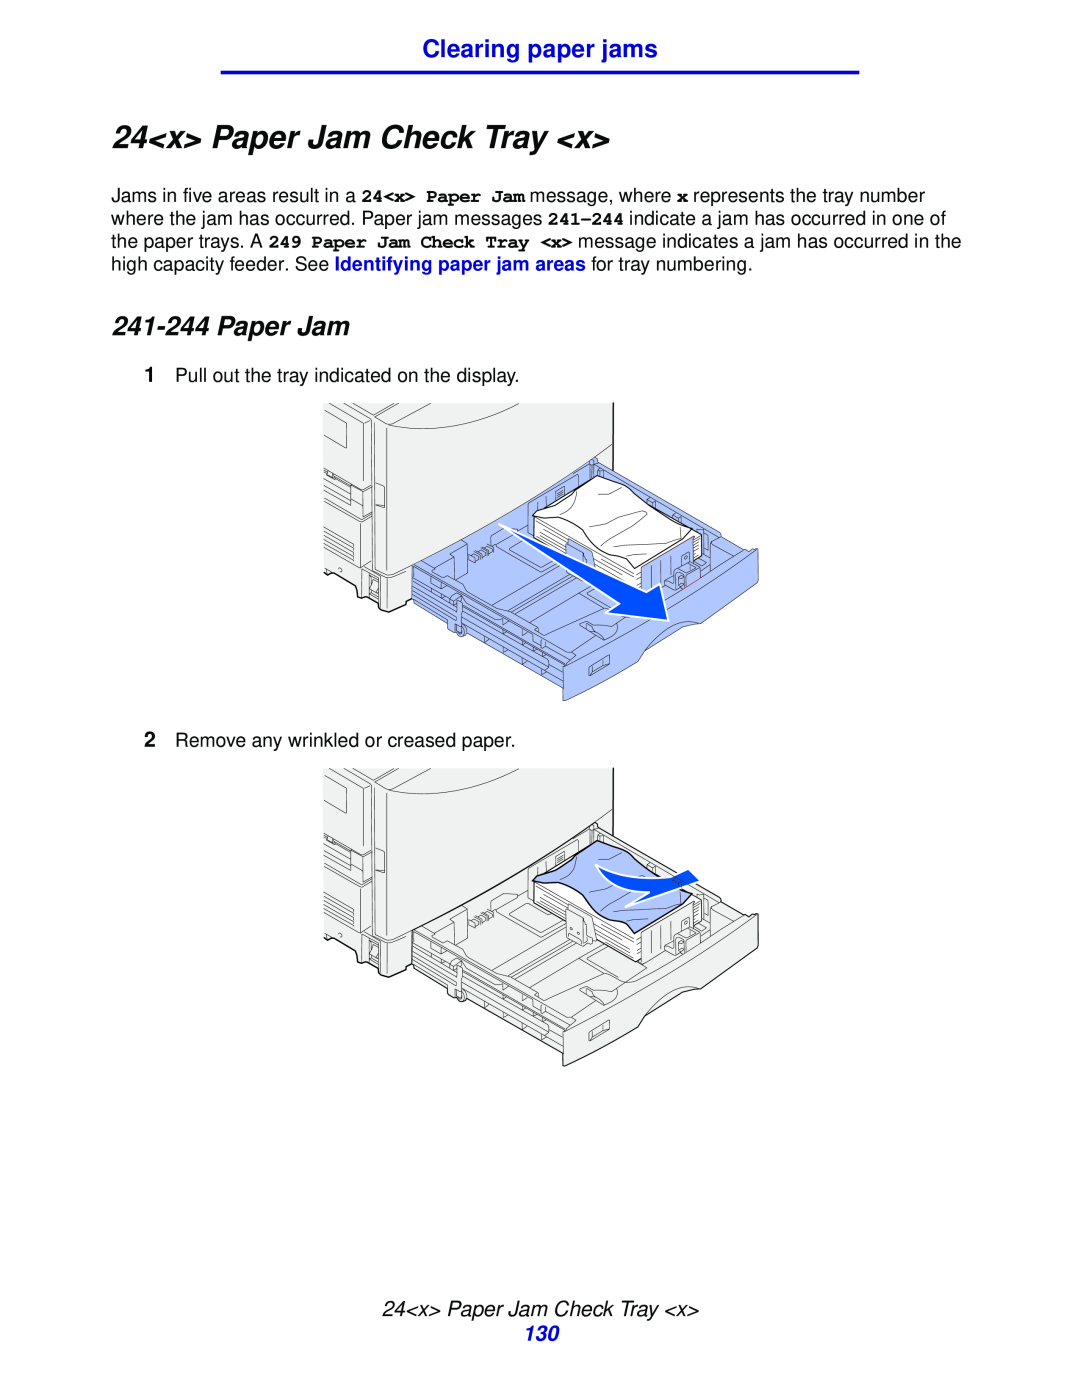 Lexmark 912 manual 24x Paper Jam Check Tray, Clearing paper jams 